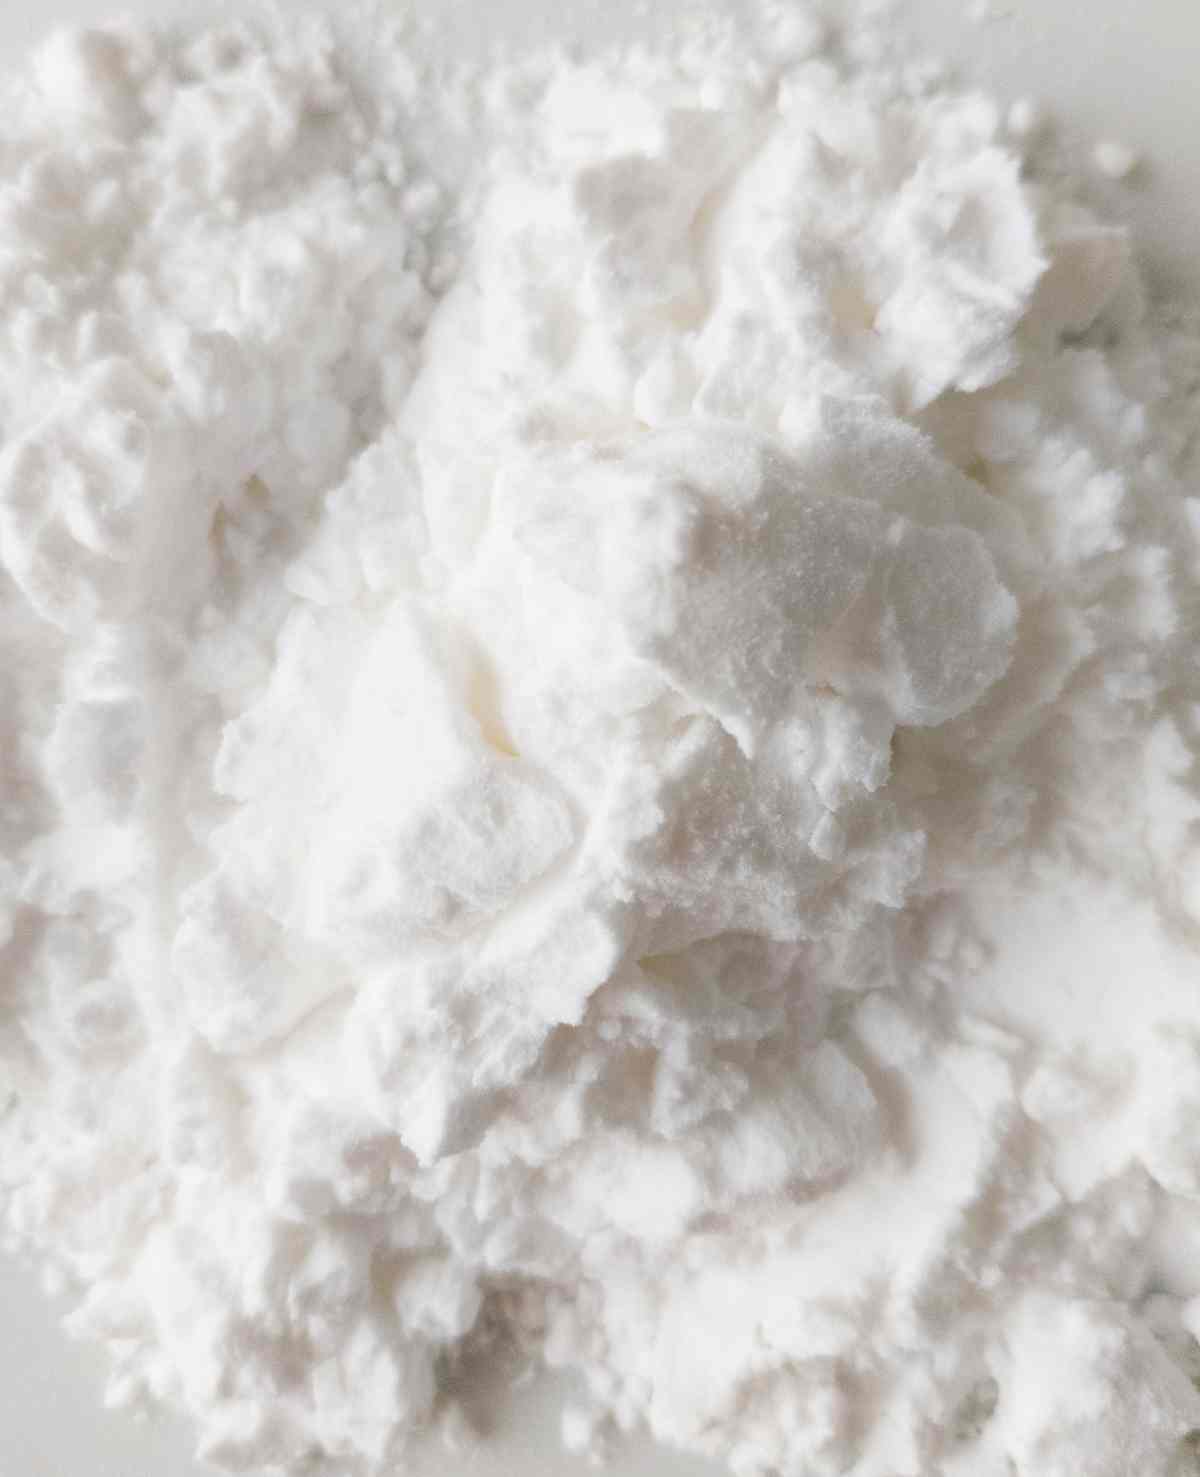 Cornstarch on the table up close.